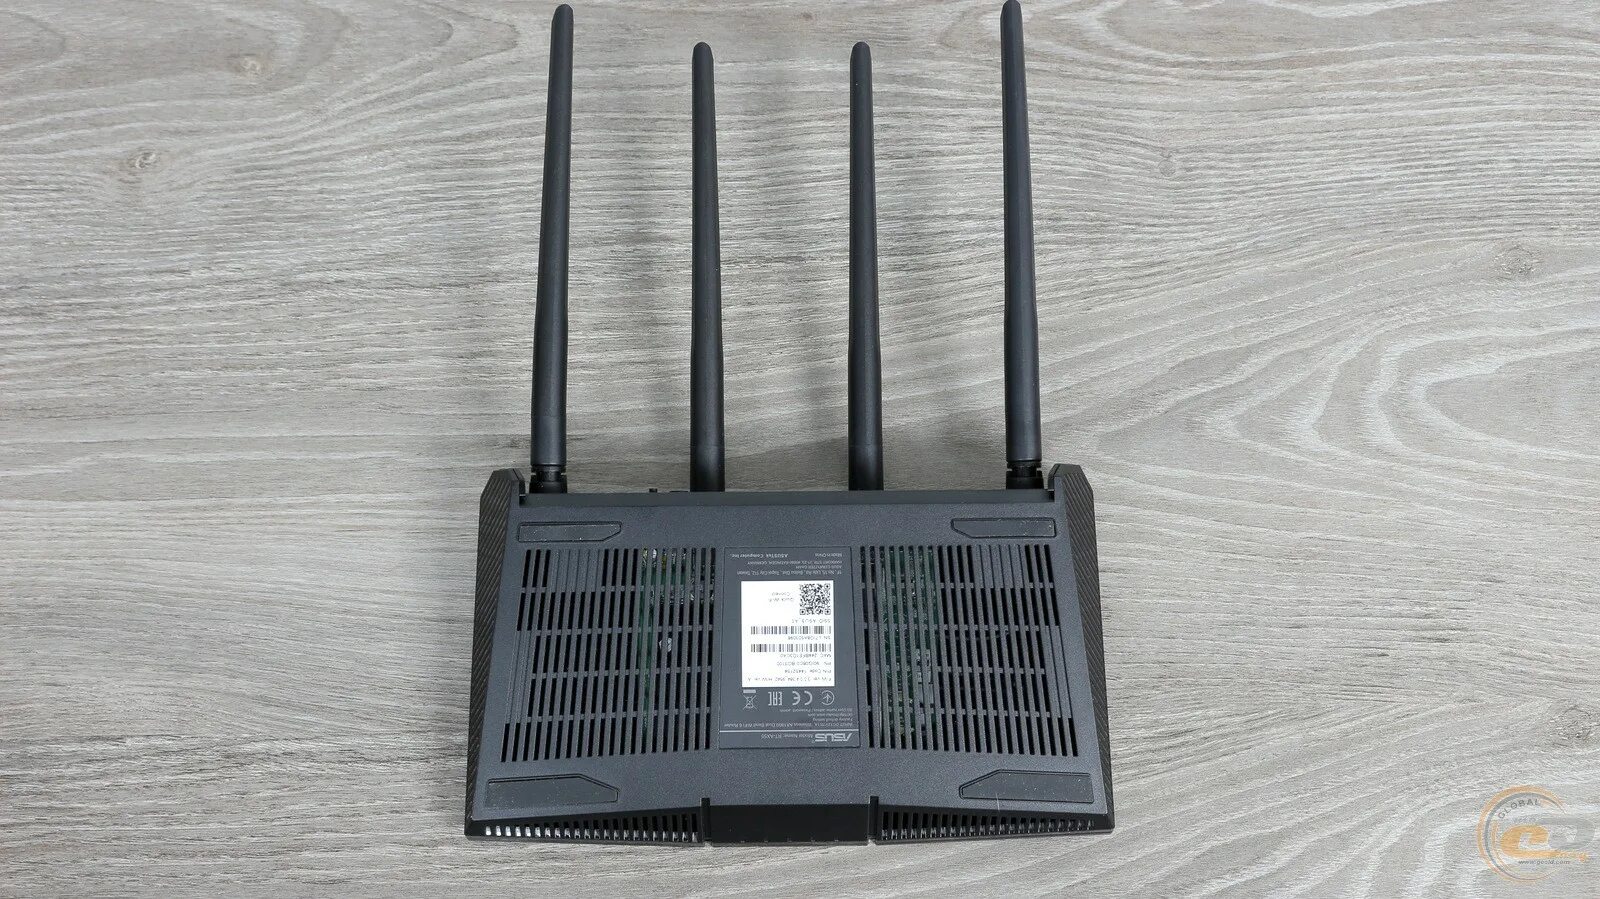 Ax55 tp link купить. ASUS RT-ax55. Wi-Fi роутер ASUS RT-ax55, черный. Wi-Fi роутер ASUS RT-ax55, ax1800,. Двухдиапазонный маршрутизатор ASUS RT-ax55.